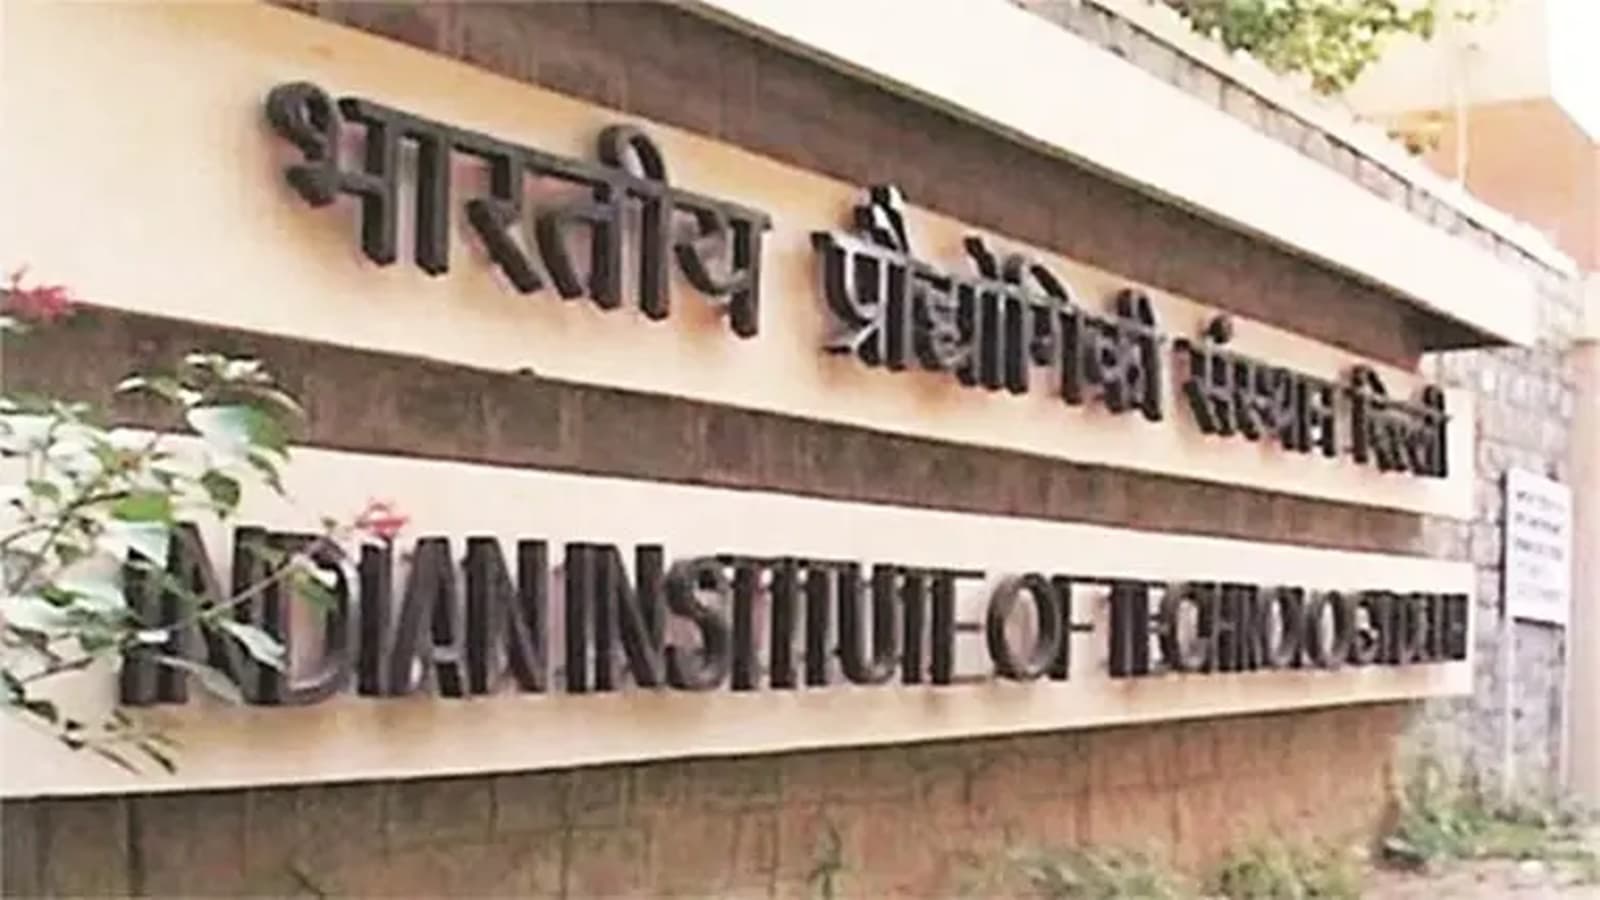 double degree masters, double degree masters IIT Gandhinagar, double degree masters Asian Institute of Technology, dual degree IIT and AIT, Asian Institute of Technology, IIT Gandhinagar, postgraduate degrees, data science and artificial intelligence, bio-nano materials science, environmental engineering, remote sensing GIS, geotechnical engineering, water engineering, sustainable energy transition, interdisciplinary research, expert faculty, world-class laboratories, networking opportunities, industry leaders, placement and career fairs, on-campus residence, e-visa processing, Indian express